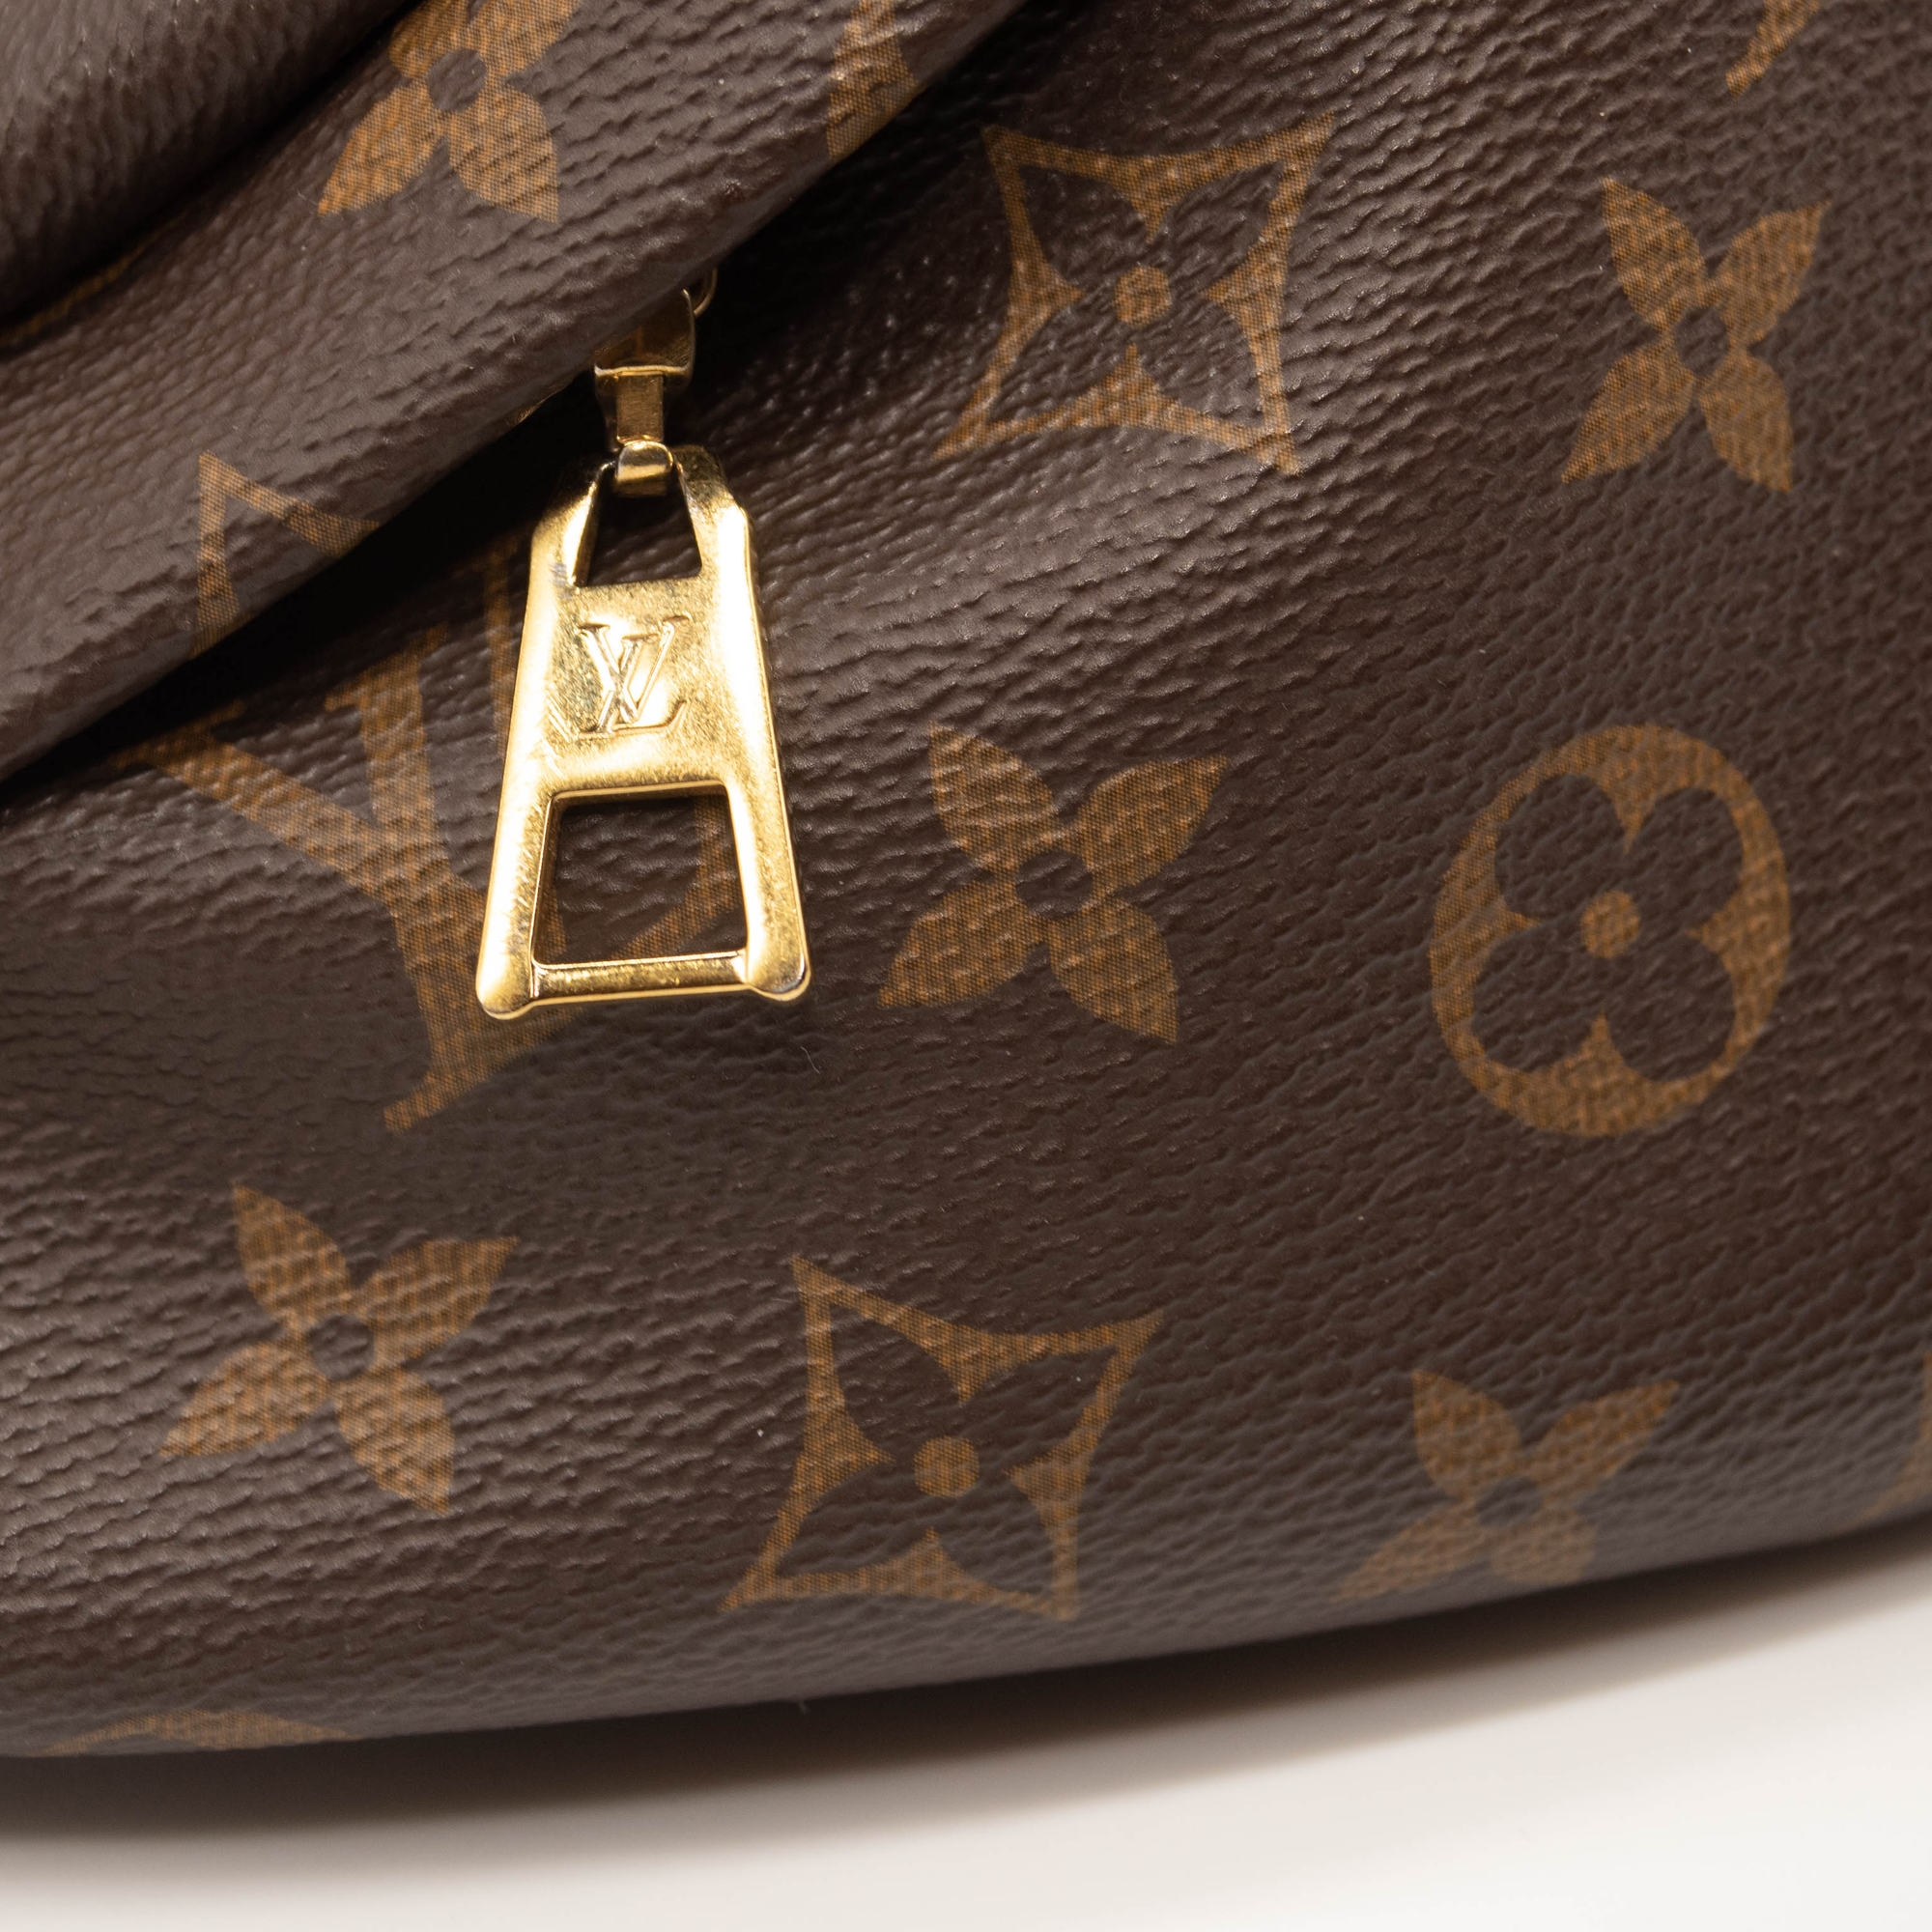 Used Louis Vuitton Bags